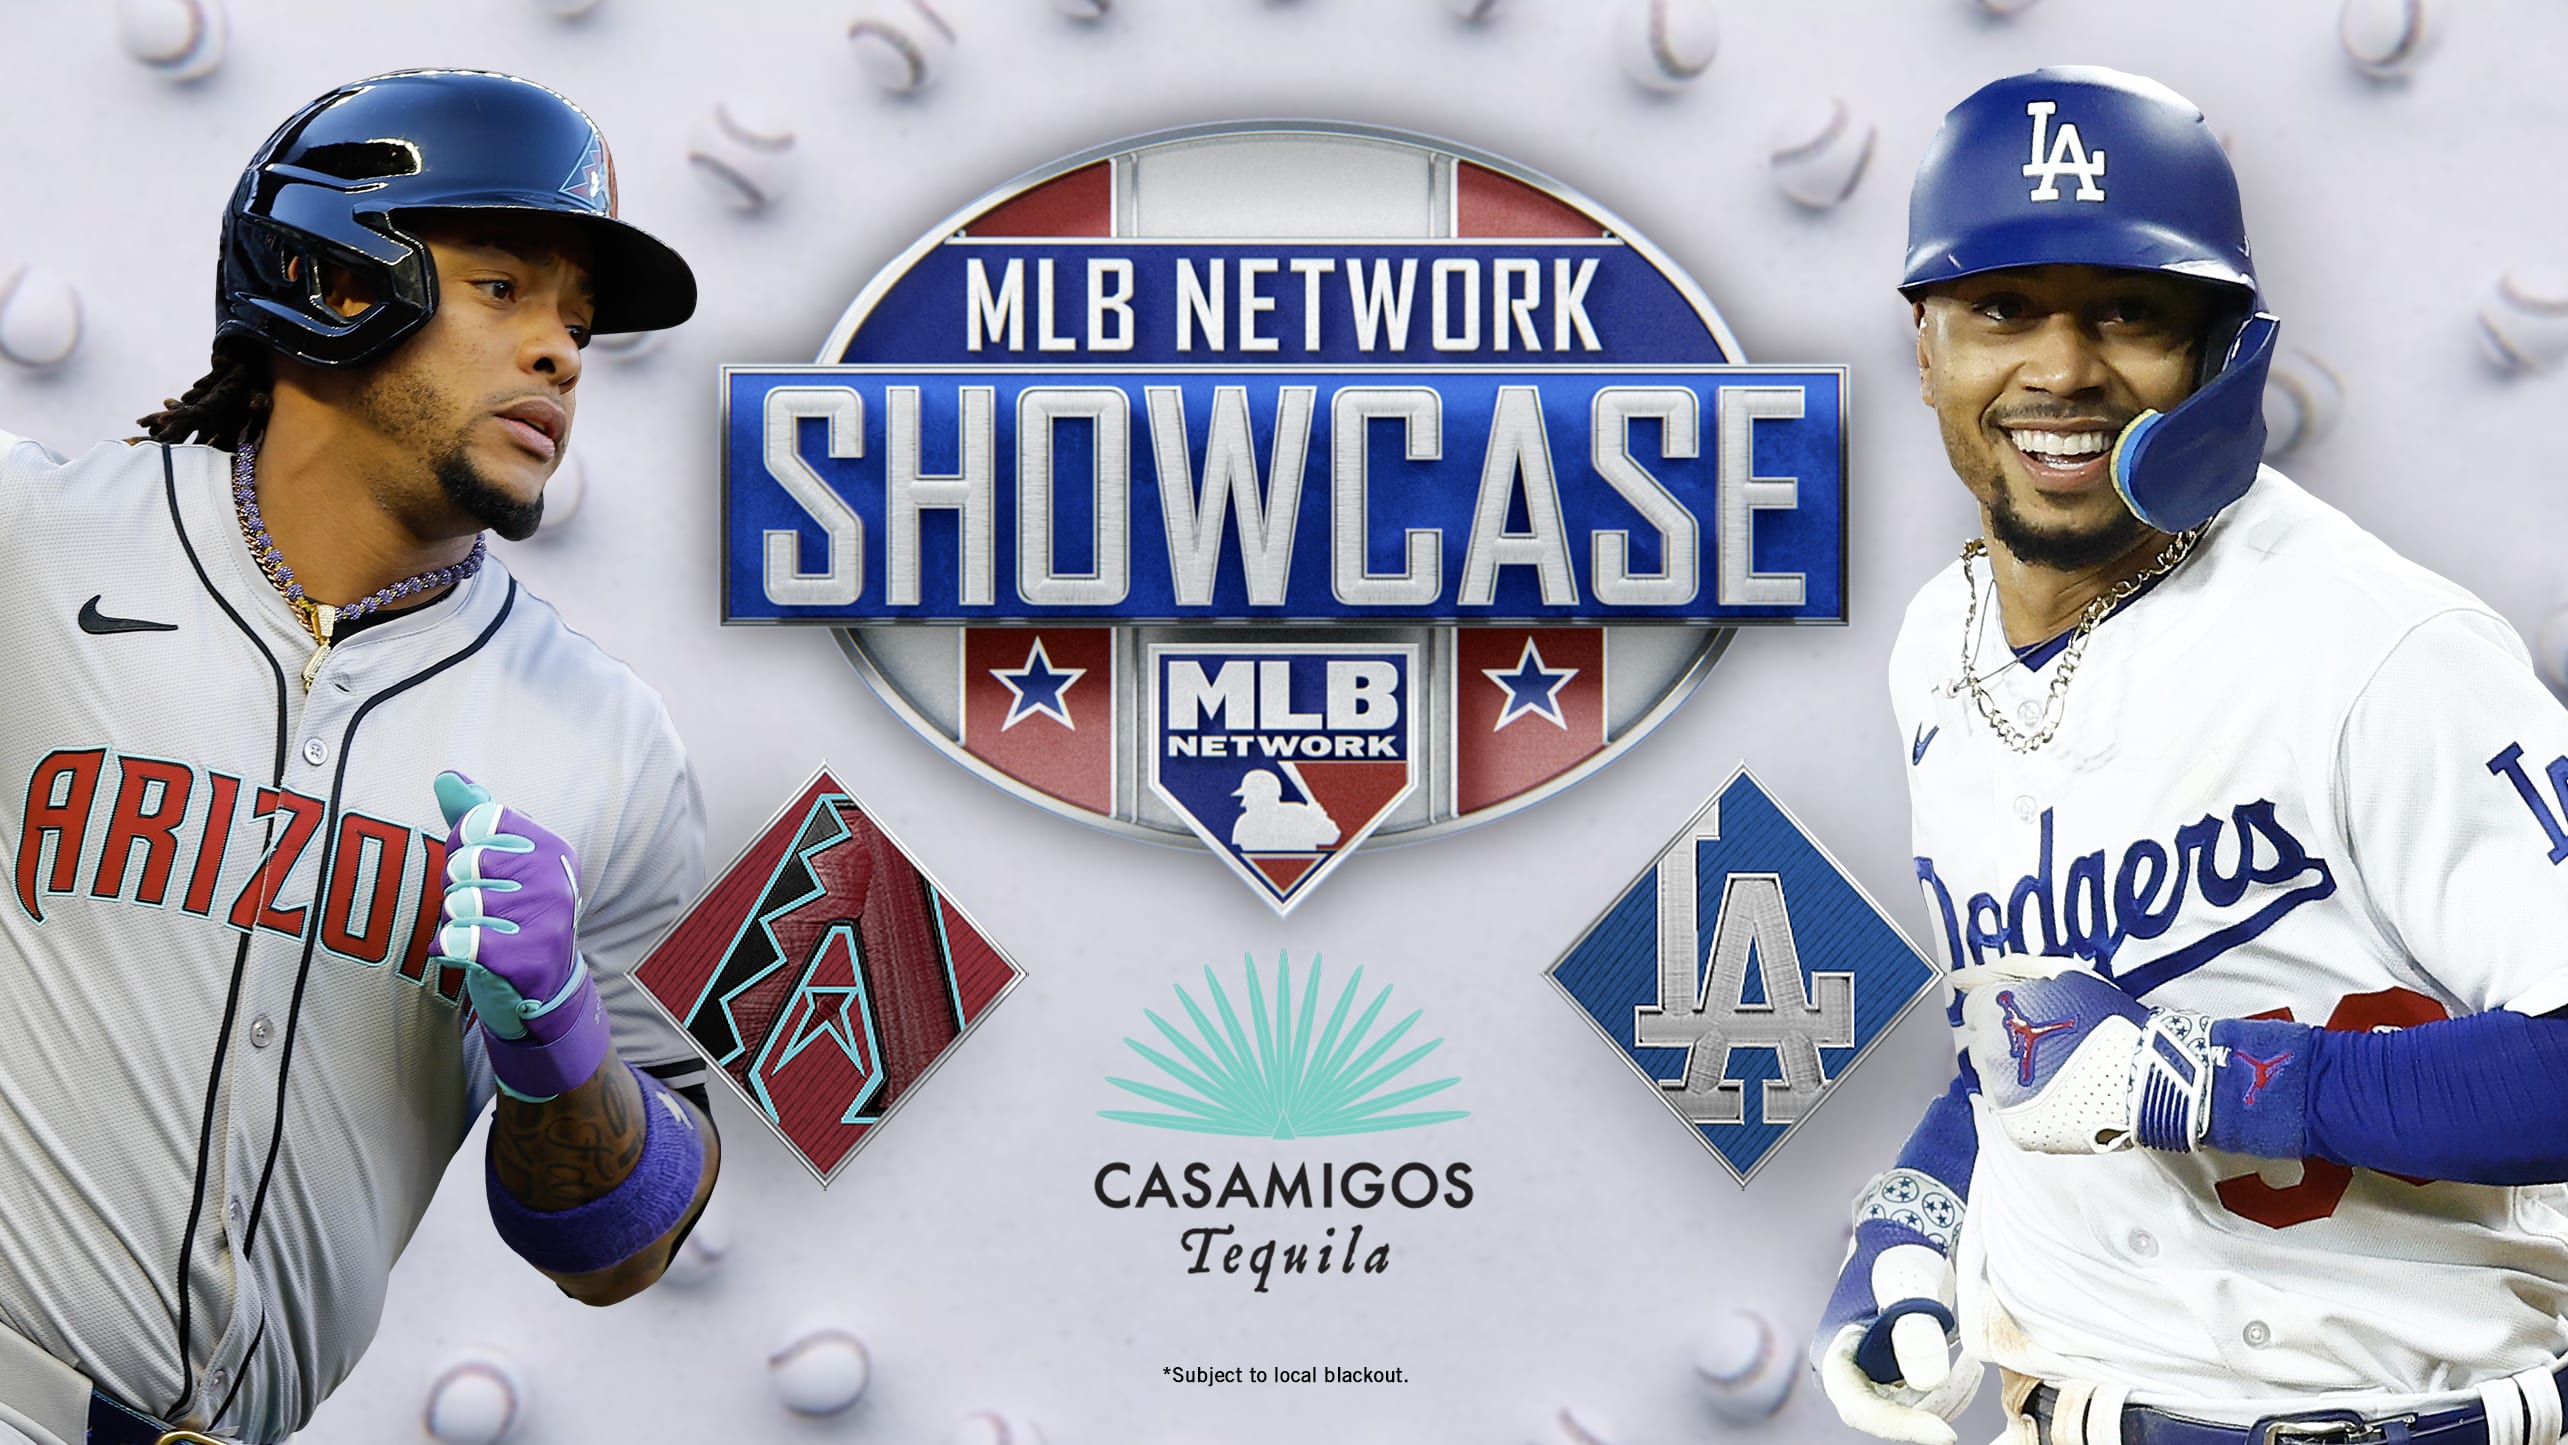 D-backs and Dodgers in MLB Network Showcase